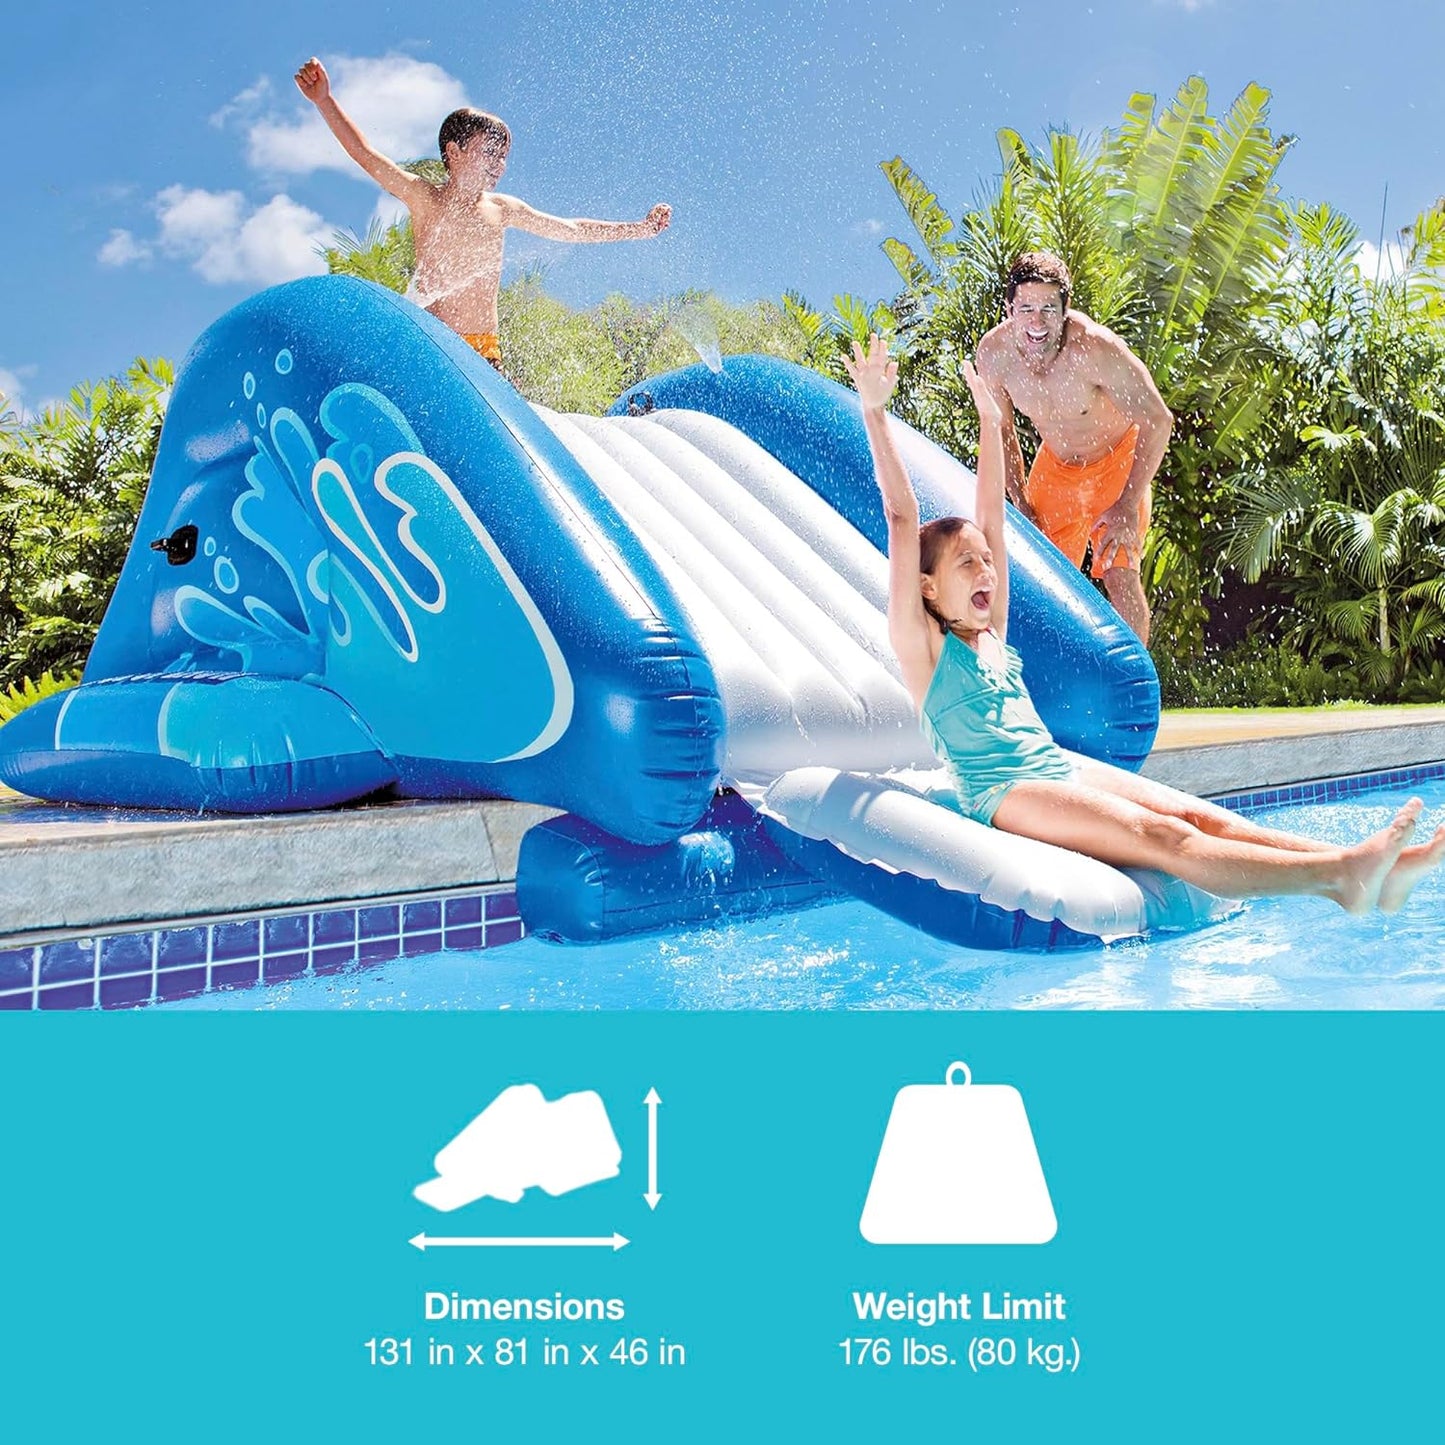 58849EP Kool Splash Durable Vinyl Inflatable Play Center Swimming Pool Water Slide with Built in Sprayers for Kids and Adults, Age 6 and Up